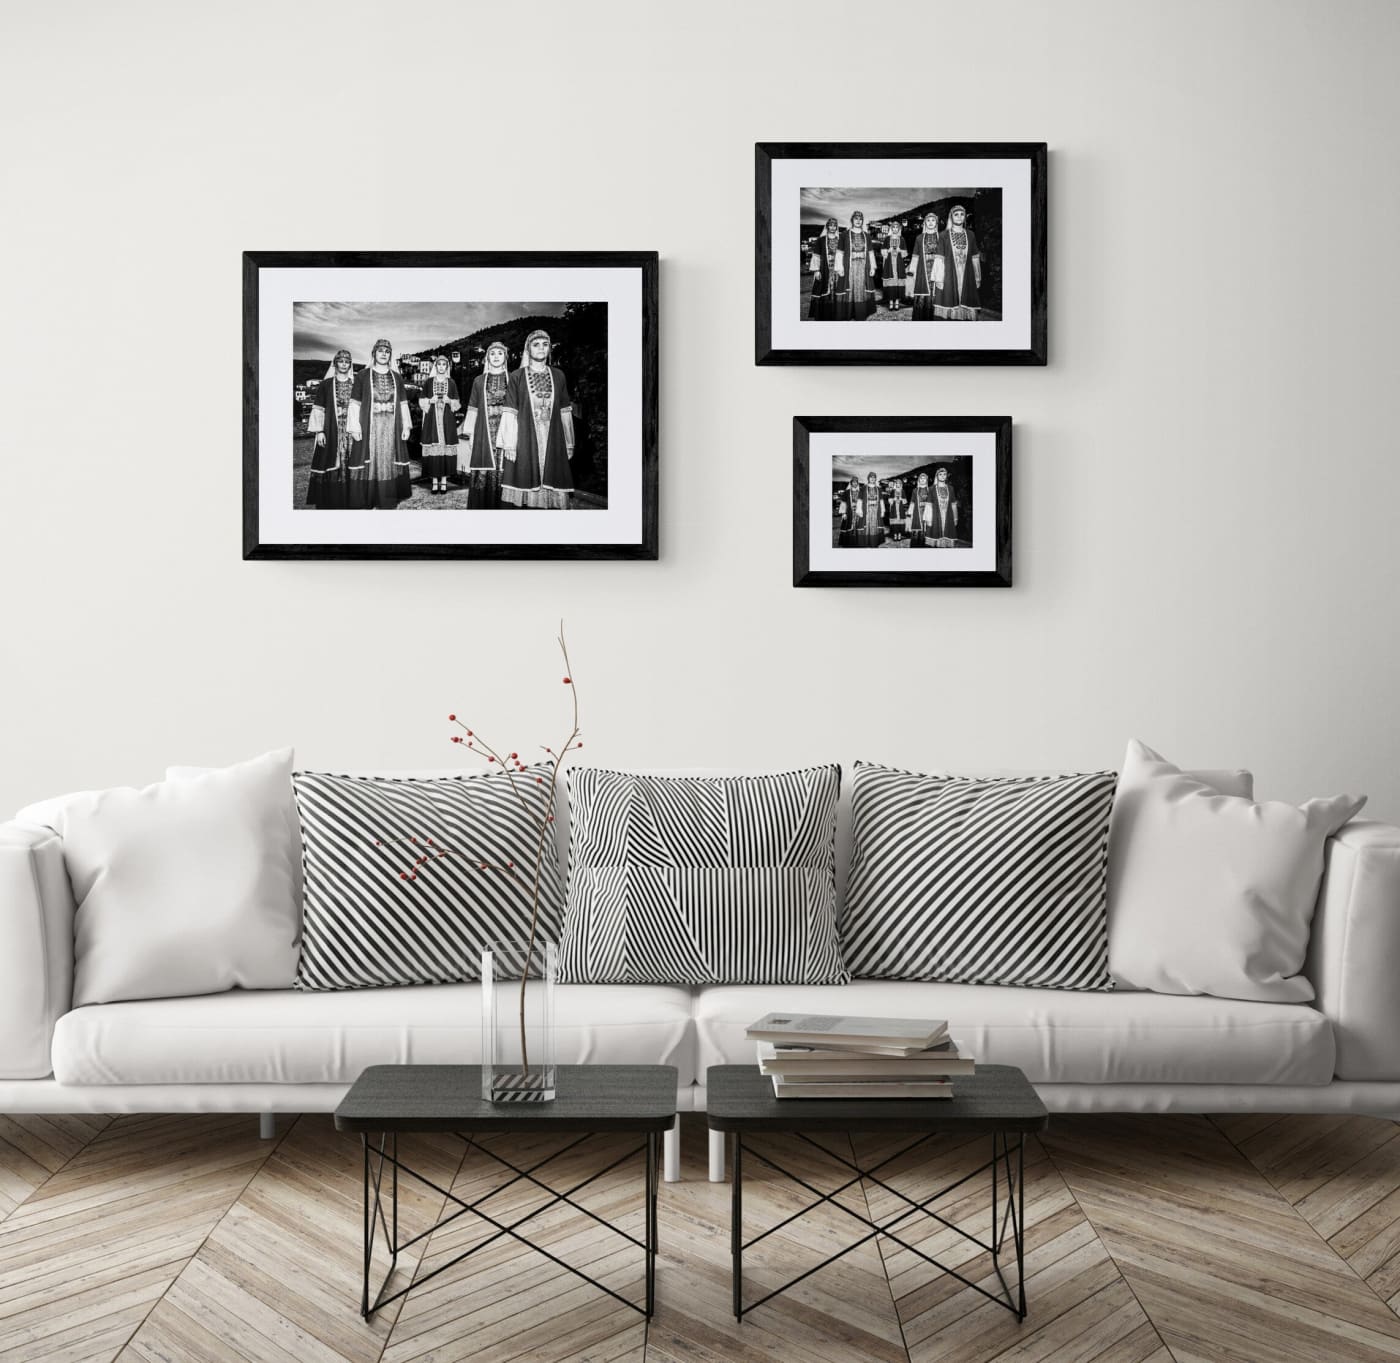 Black and White Photography Wall Art Greece | Costumes of Prastos overlooking the village Arcadia Peloponnese by George Tatakis - framing options